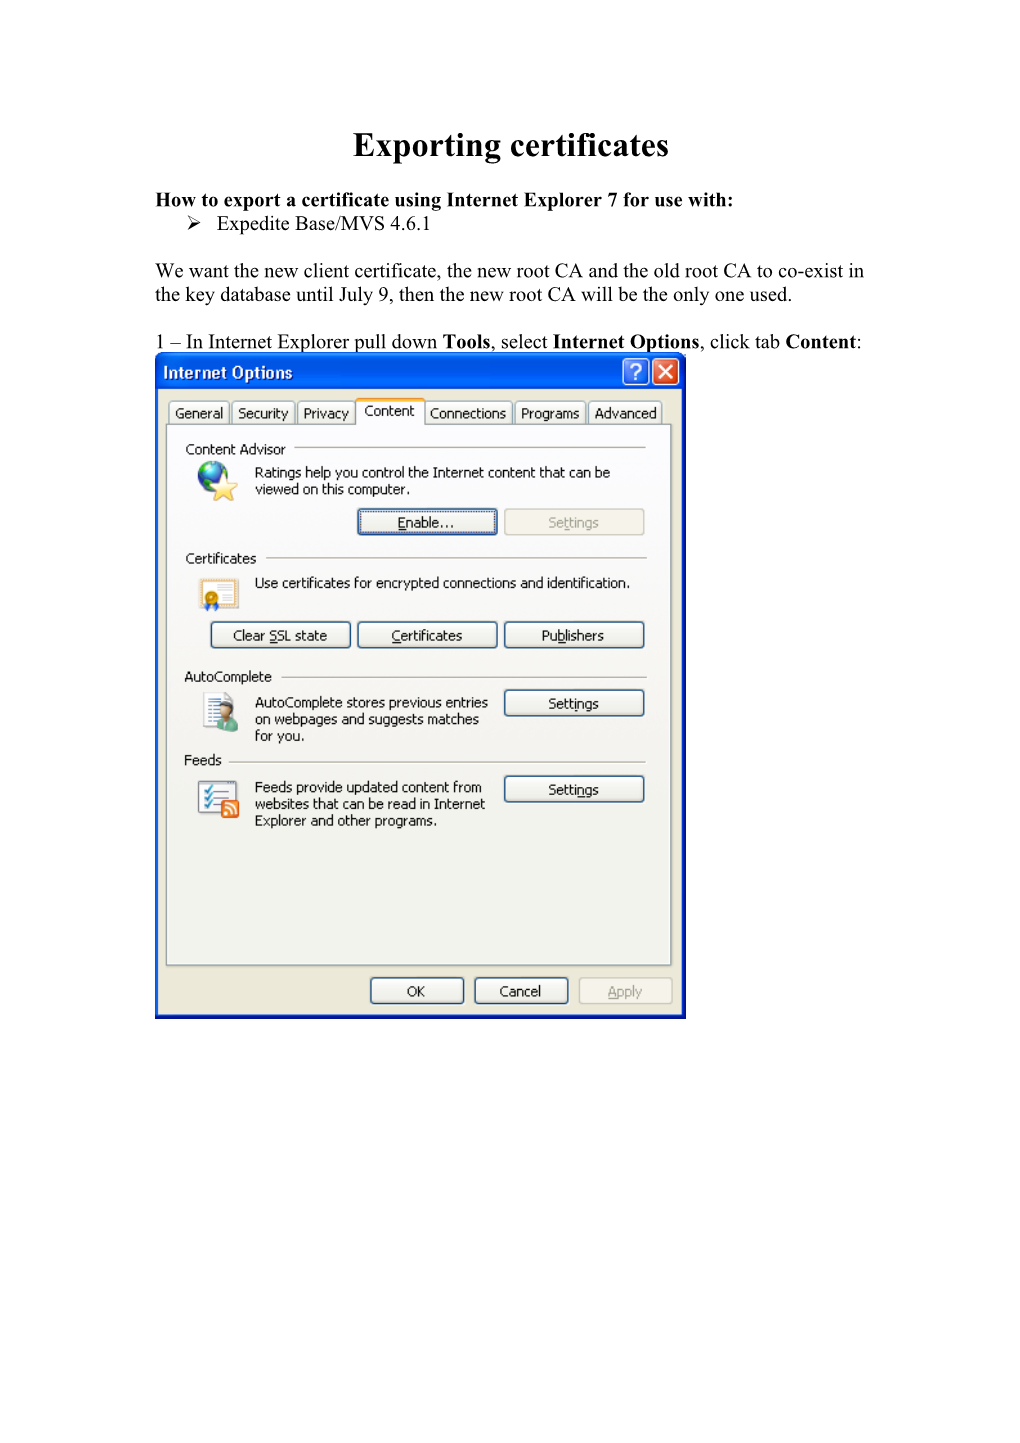 How to Export a Certificate Using Internet Explorer 7 for Use With